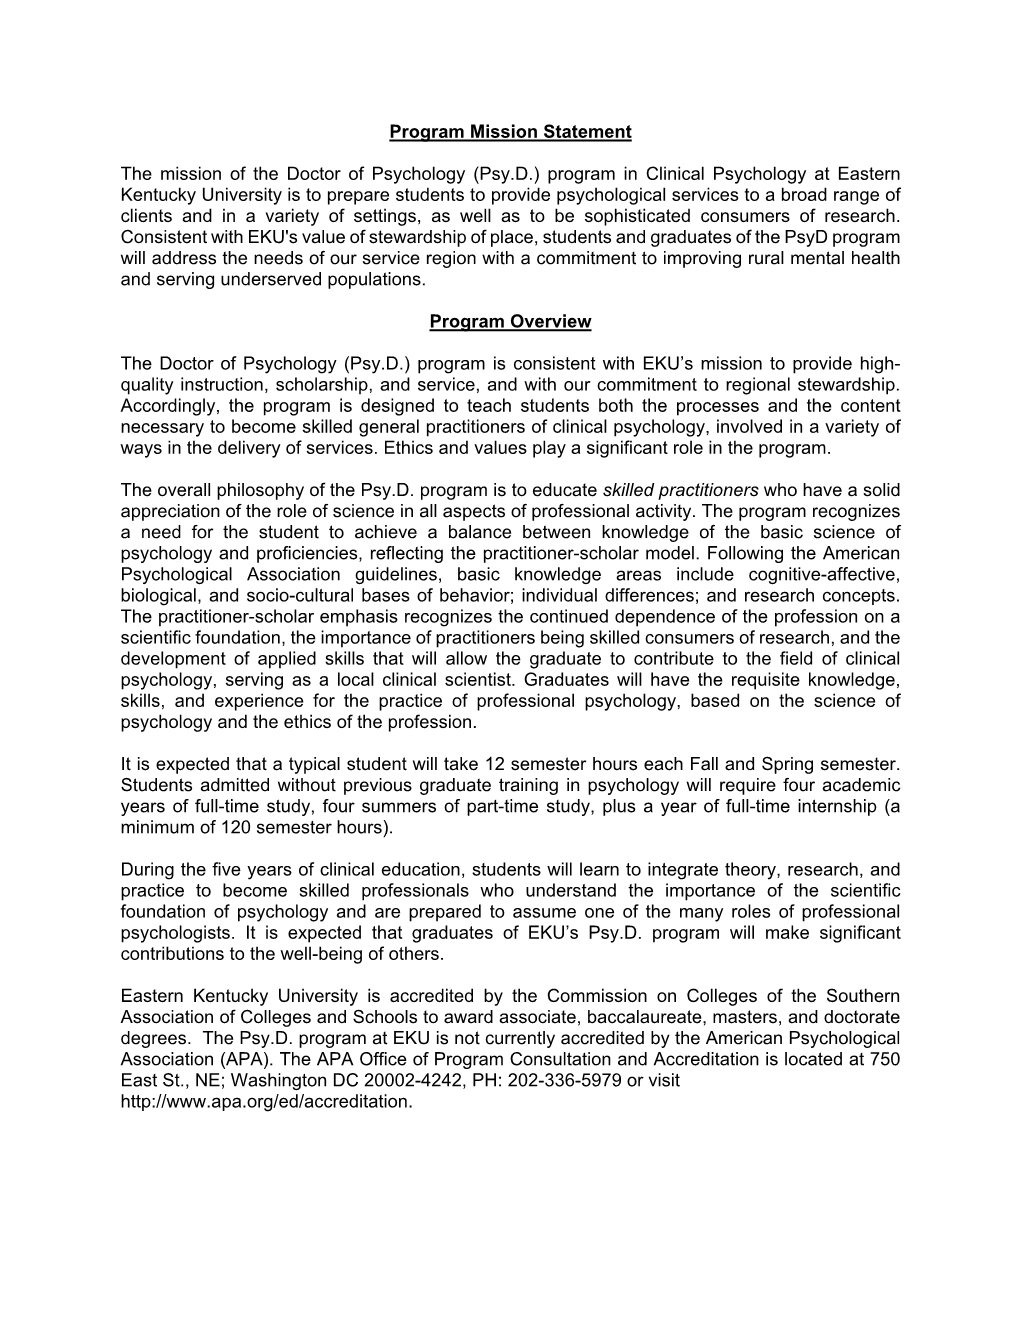 Program Mission Statement the Mission of the Doctor of Psychology